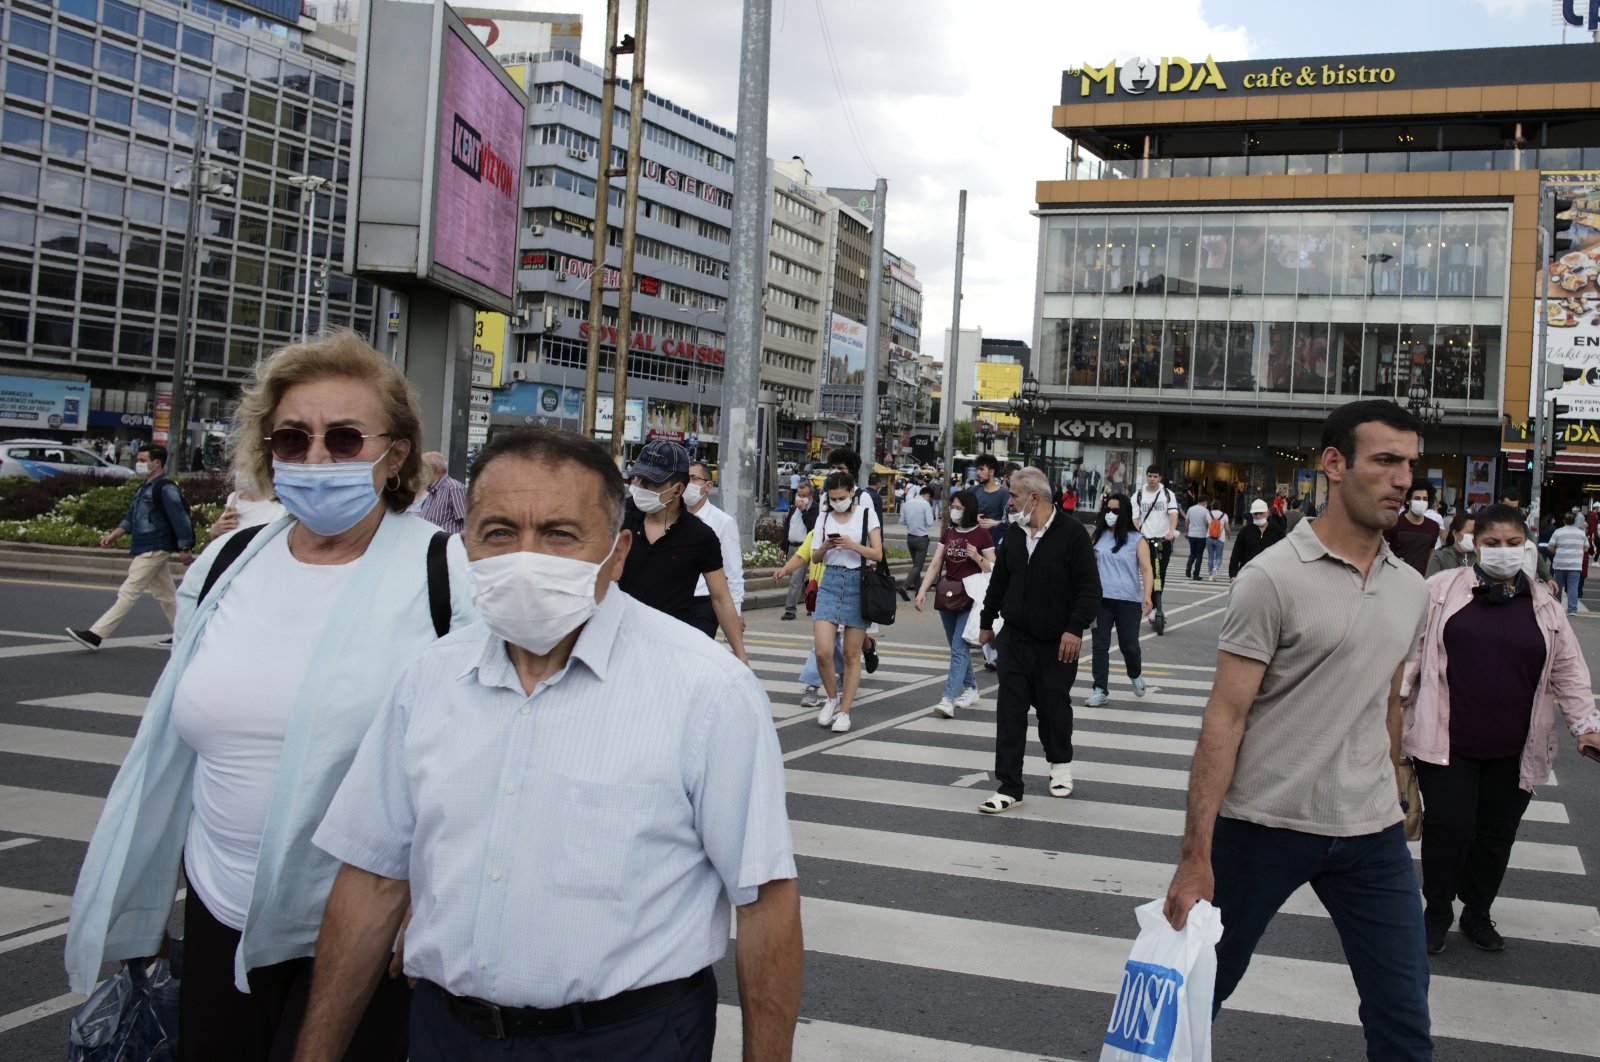 People wearing face masks to protect against the spread of coronavirus, walk in the main Kızılay Square, in Ankara, Turkey, Tuesday, June 16, 2020. (AP Photo)